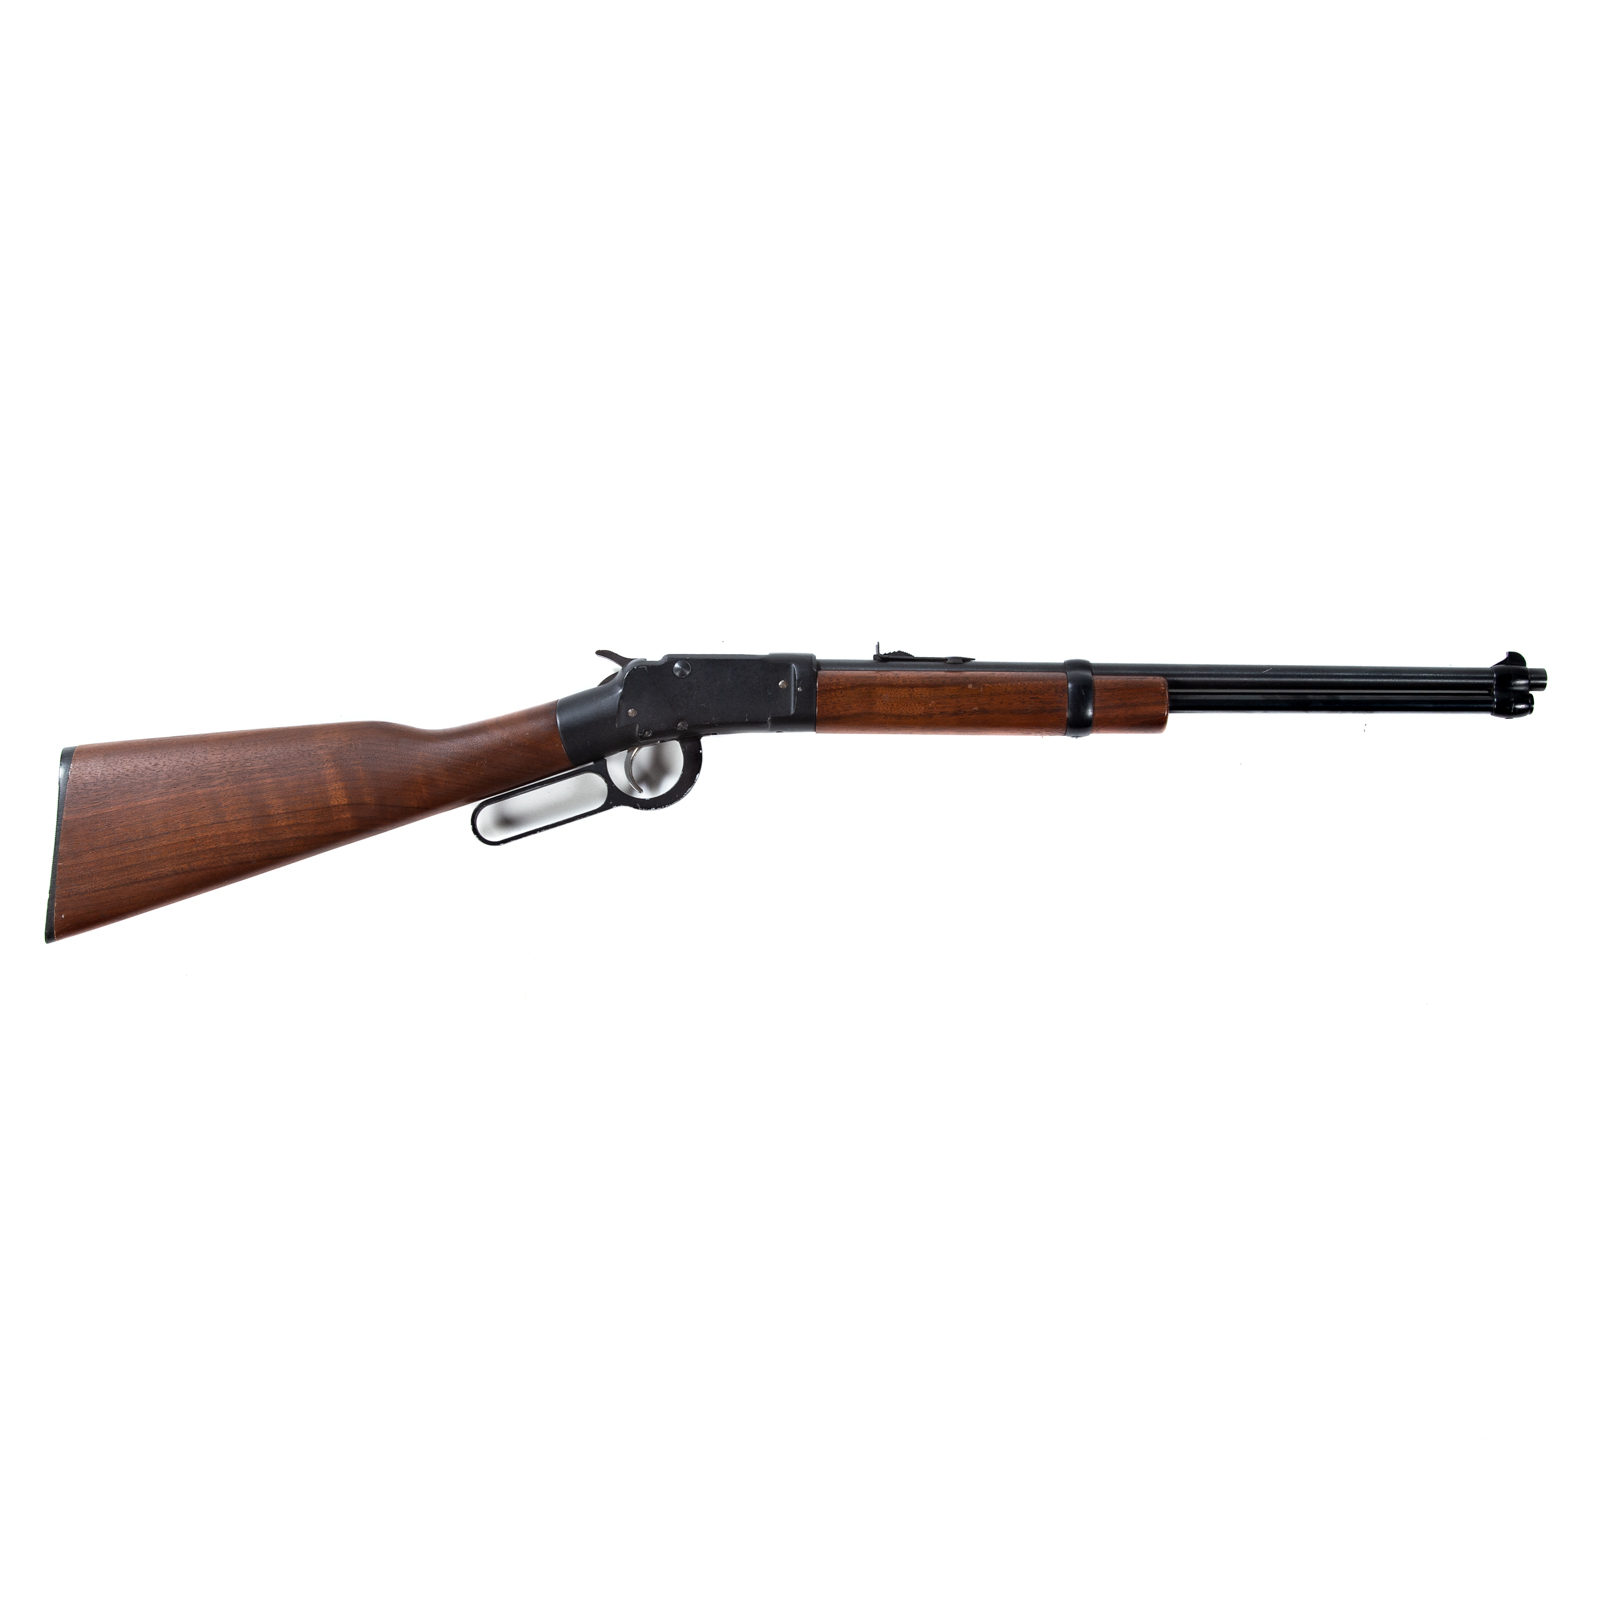 ITHACA M 49 22 CAL LEVER ACTION 2eae3f